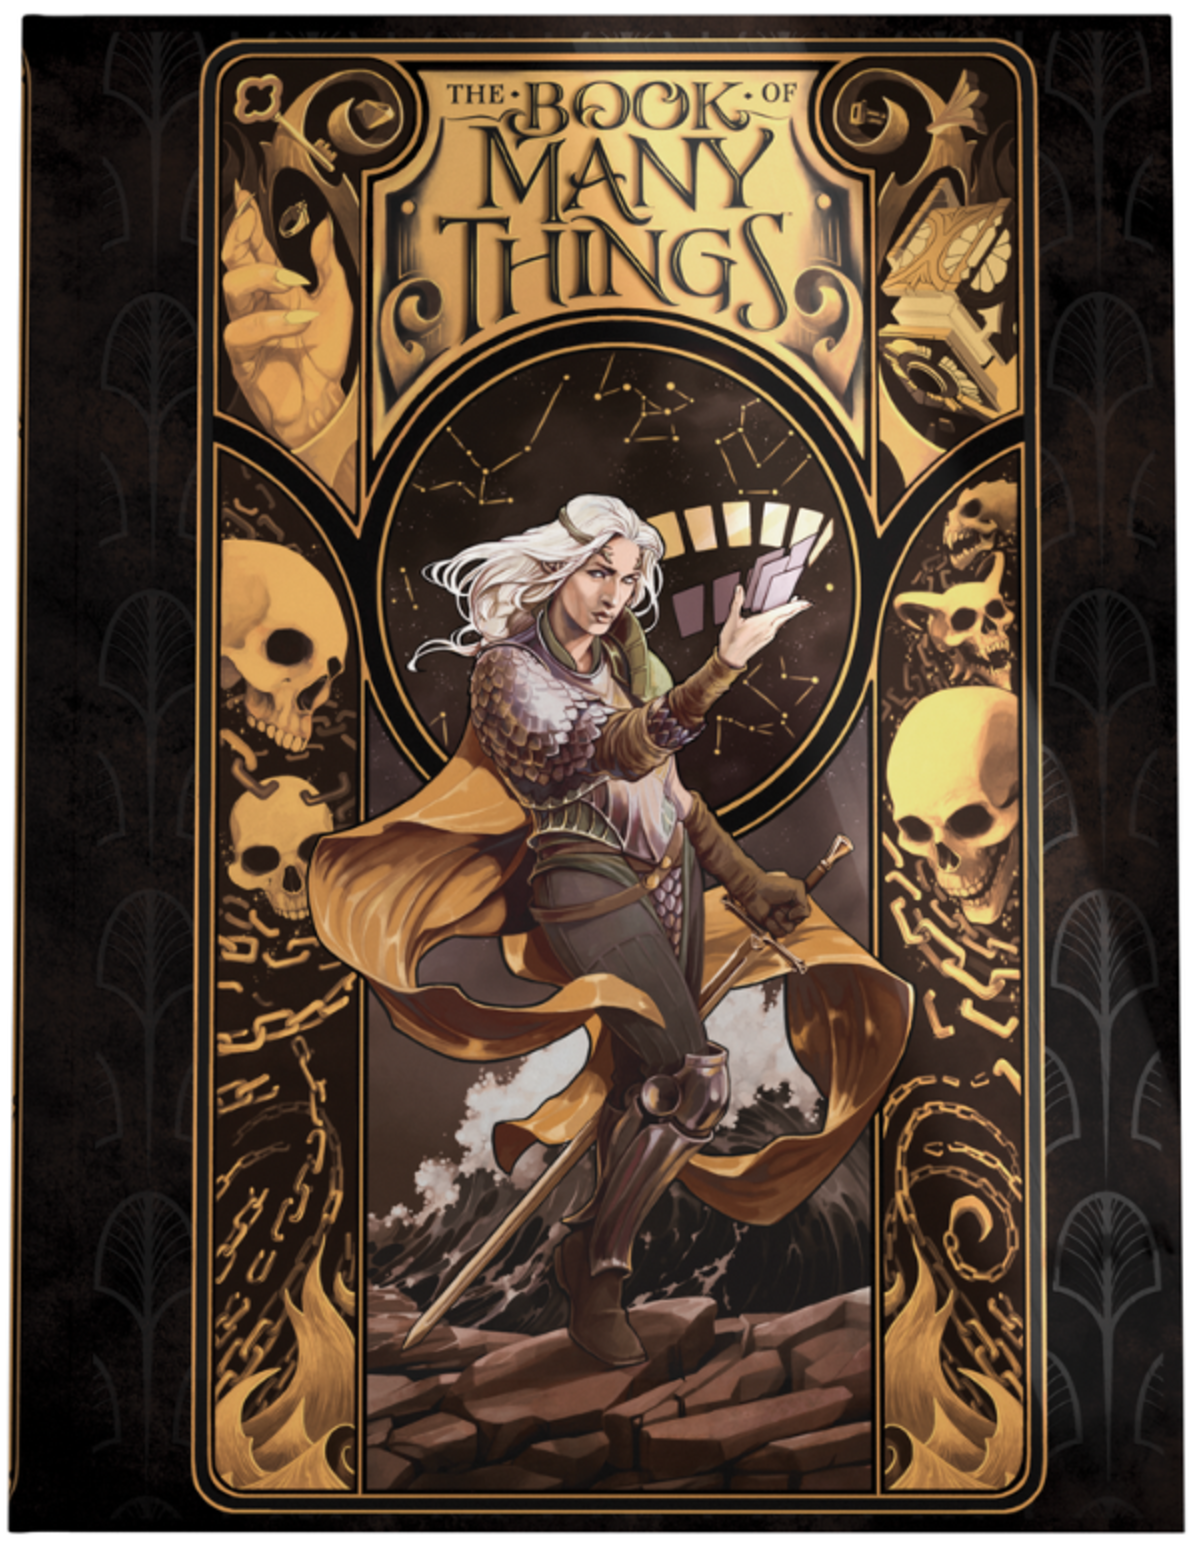 Review – The Deck of Many Things – Strange Assembly